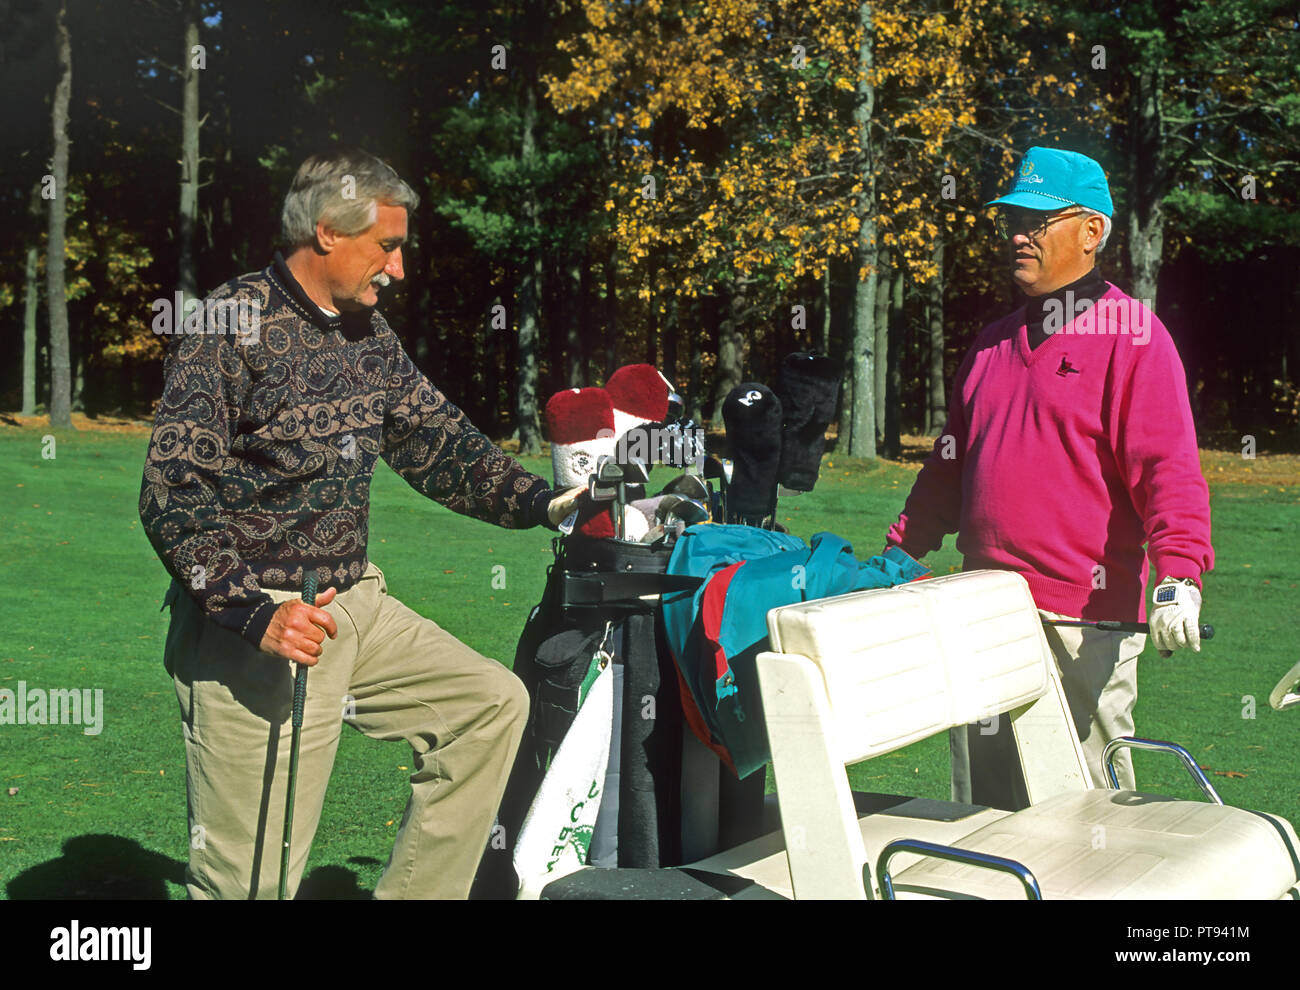 Two golfers on the course in a business discussion Stock Photo